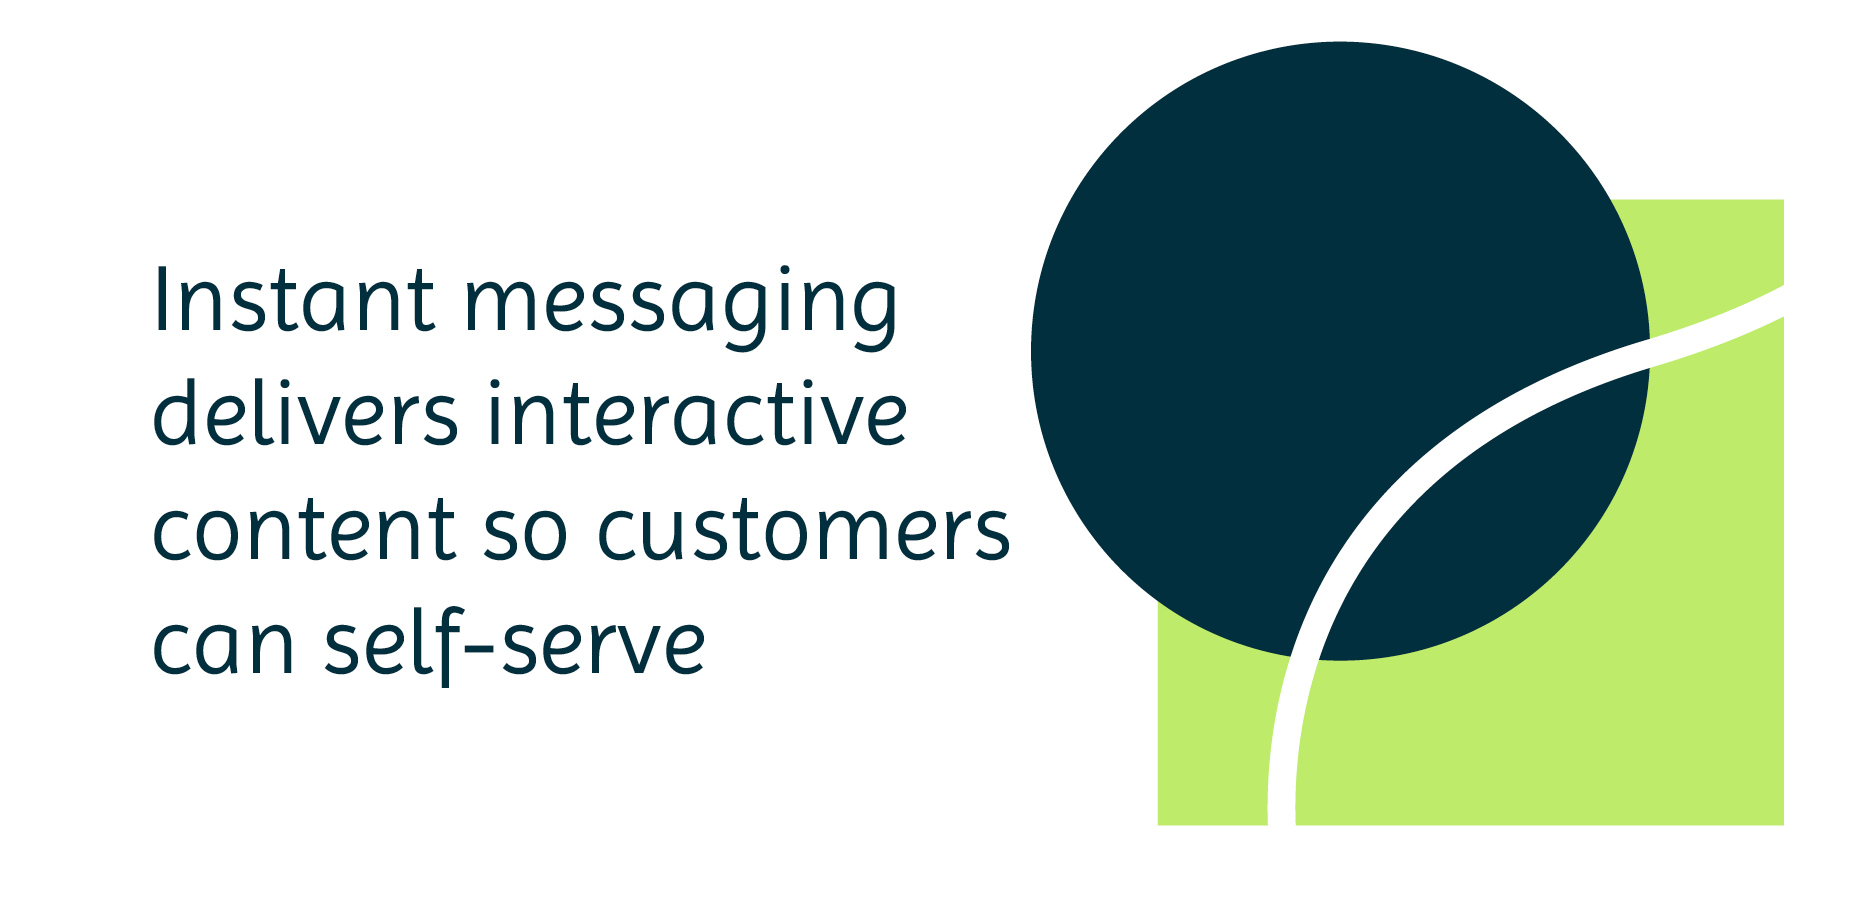 Instant messaging delivers interactive content so customers can self-serve